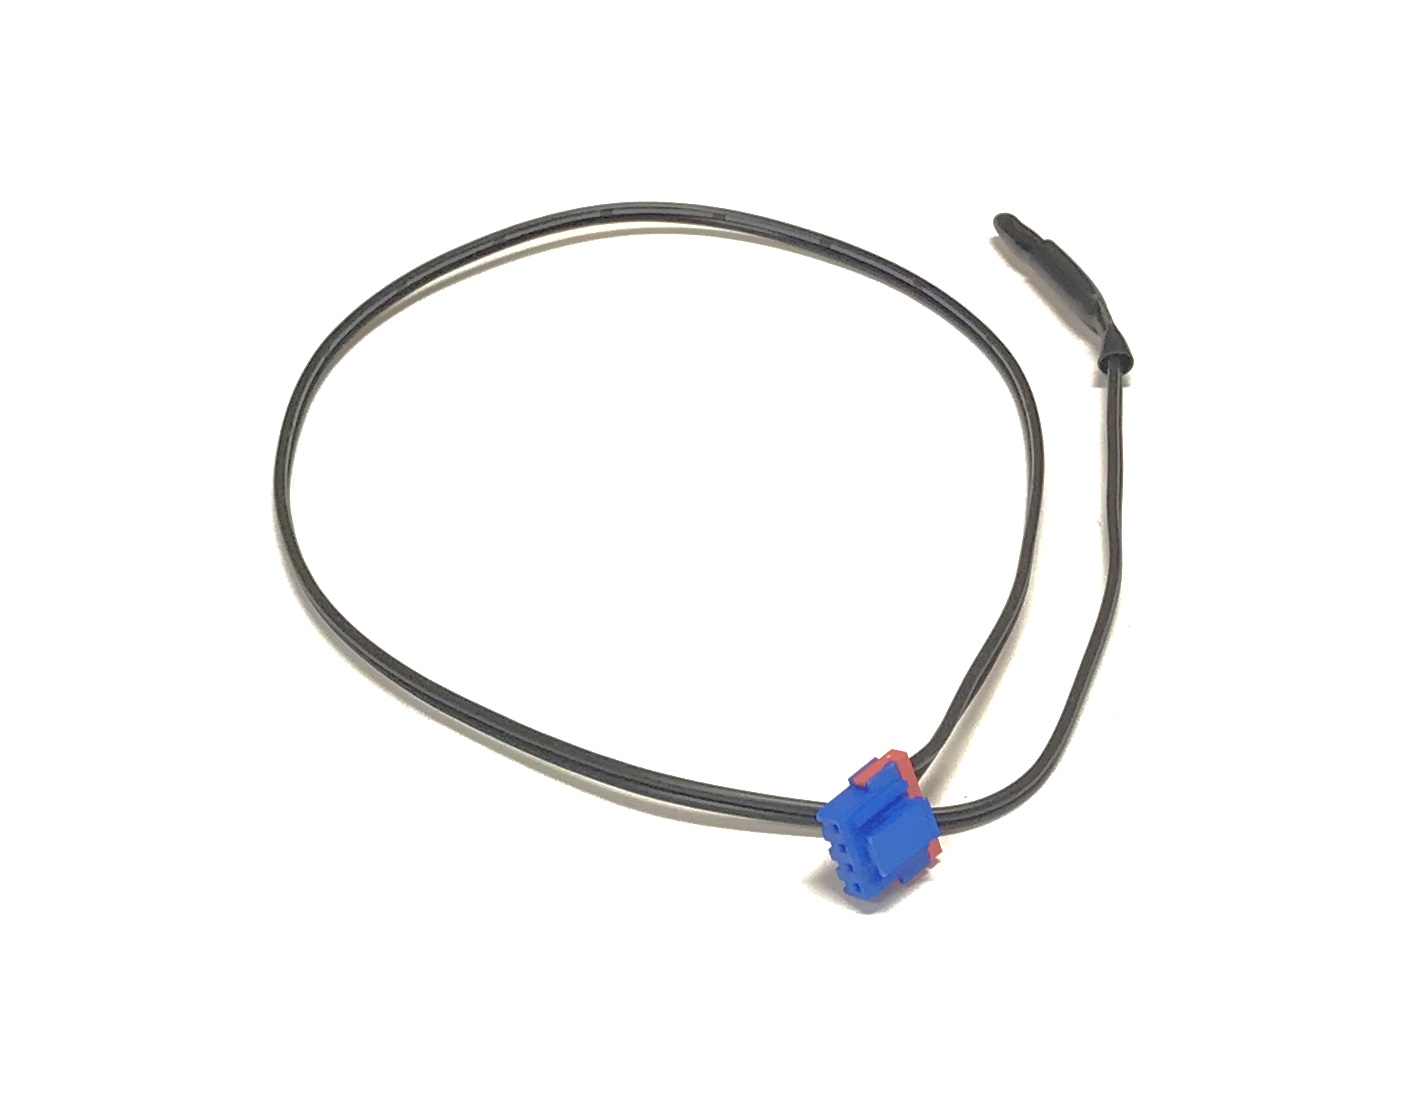 LG Air Conditioner AC Thermistor Shipped With LW6511R, LWHD6500SR, LWHD1200HRY7